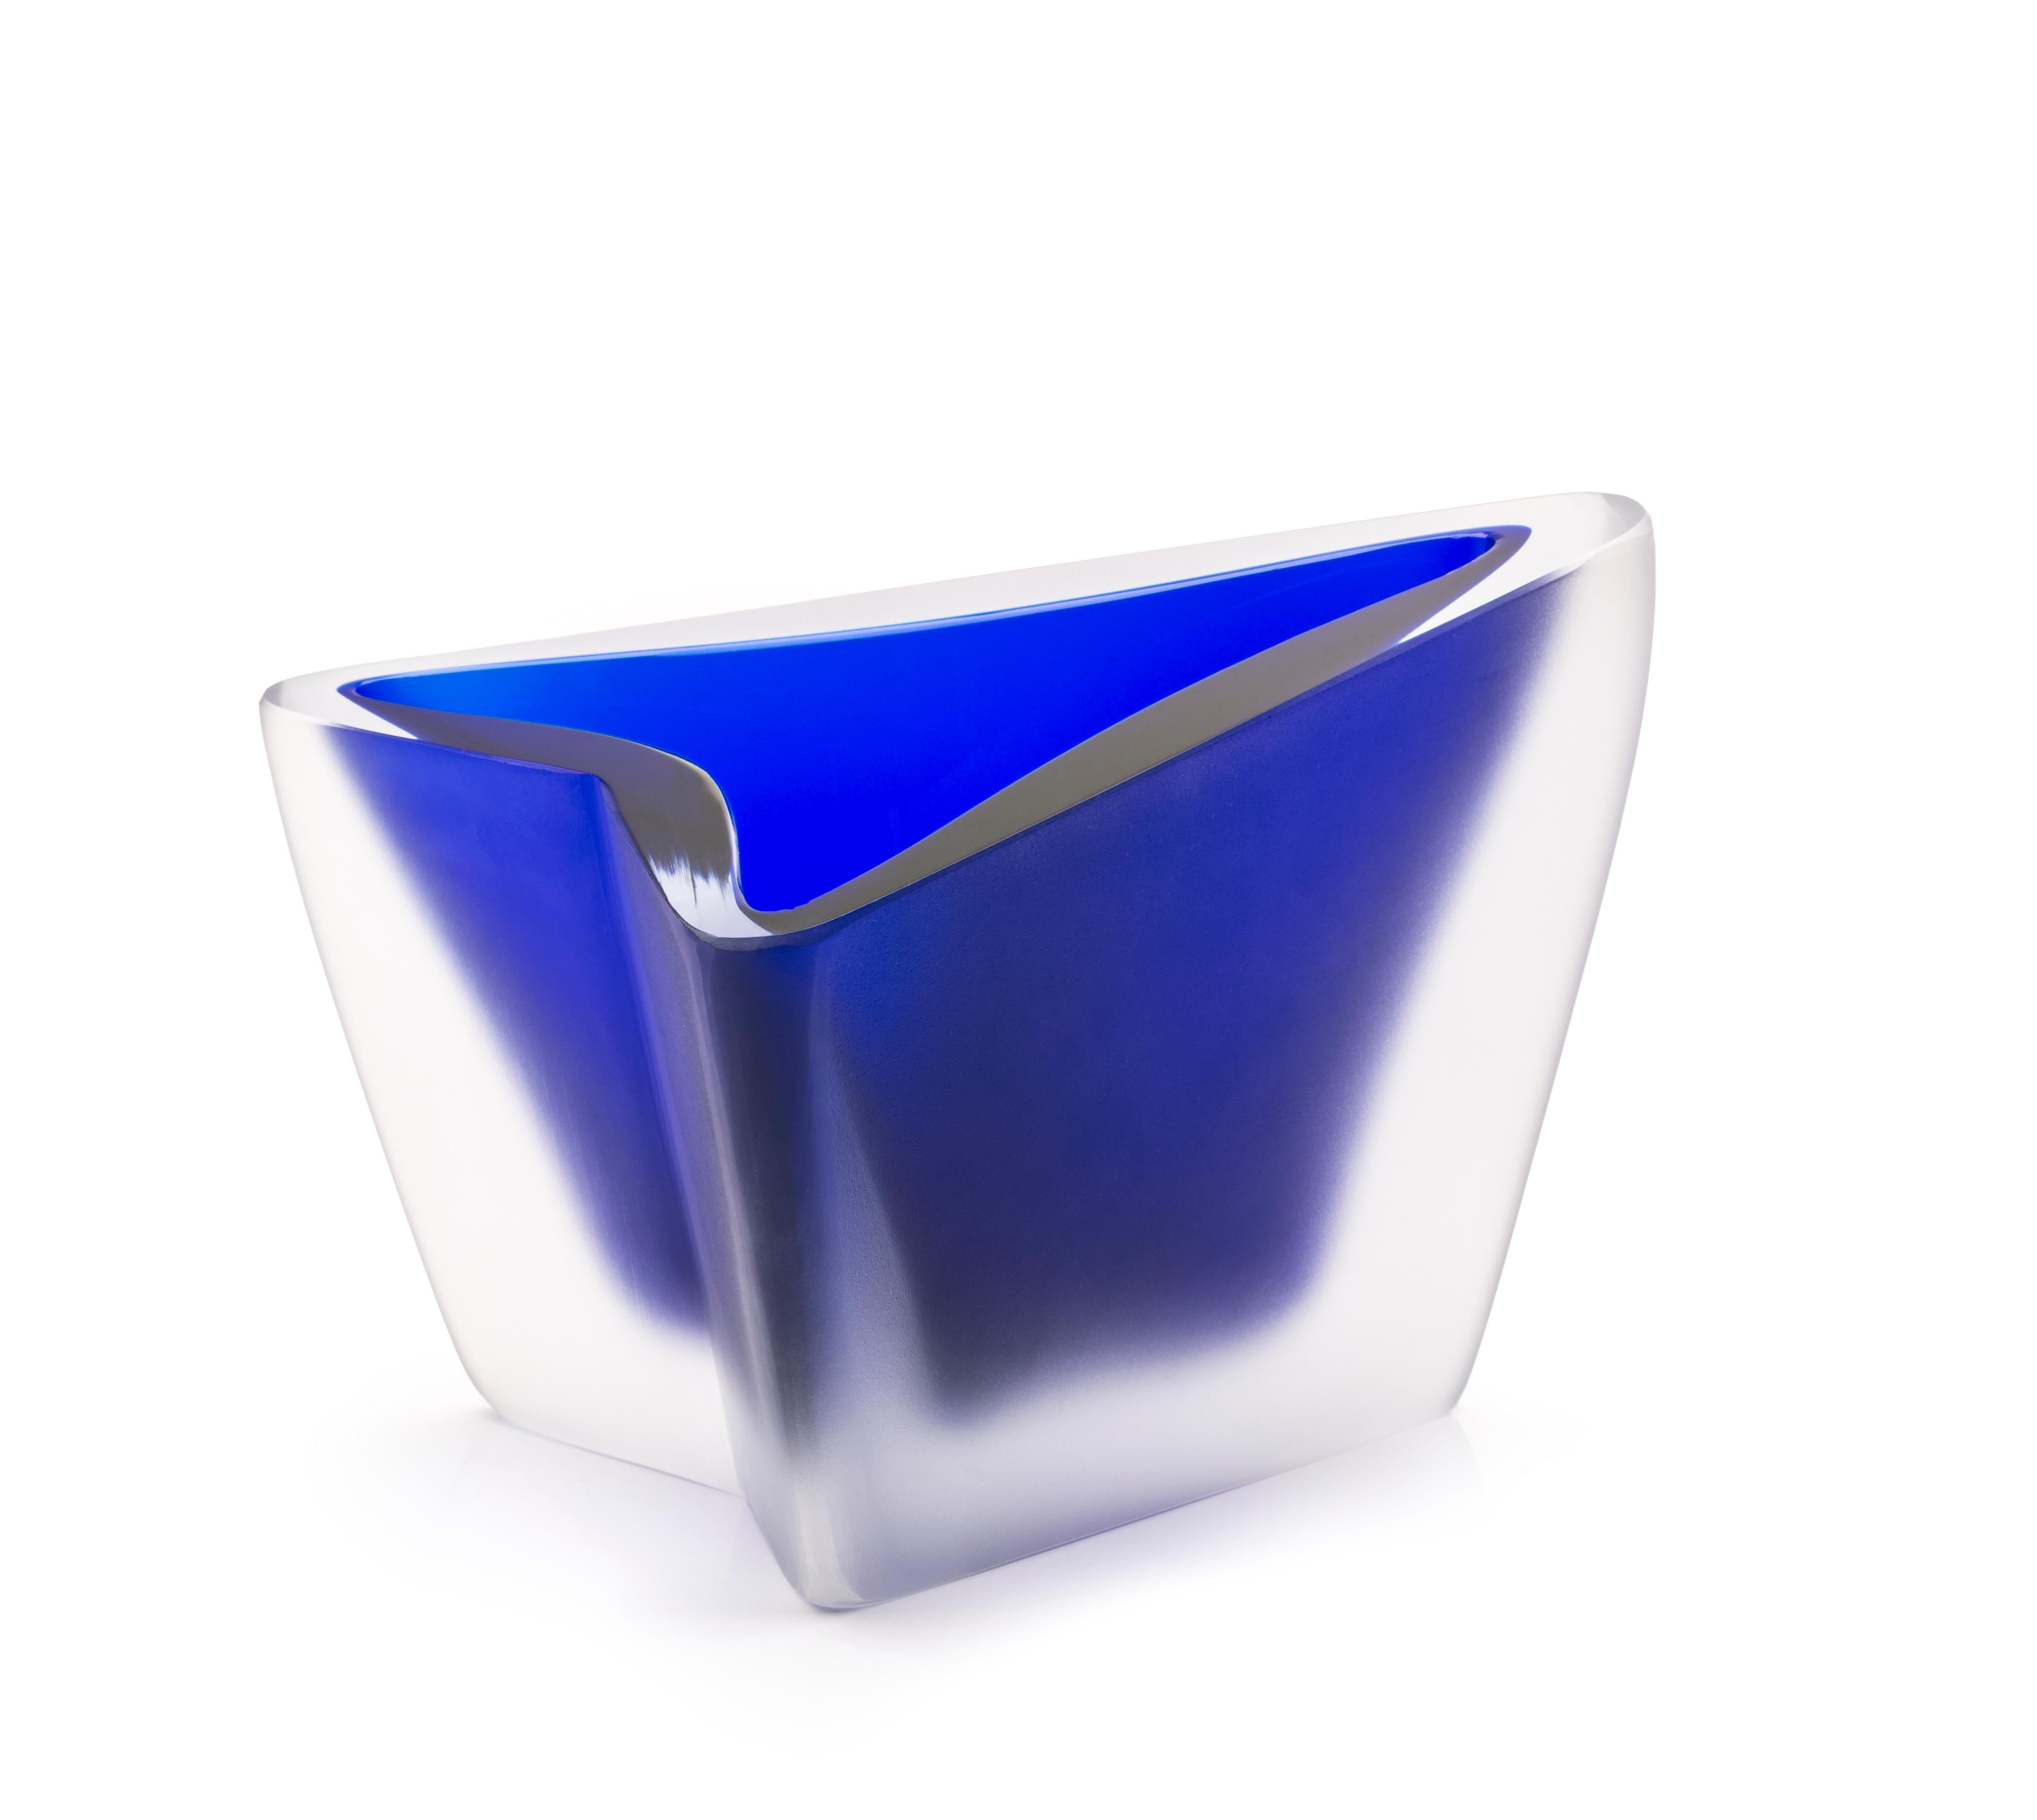 Freccia small blue vase by Purho
Dimensions: D25 x W21 x H16 cm
Materials: Glass
other colours and dimensions are available.
Purho is a new protagonist of made in Italy design , a work of synthesis, a research that has lasted for years, an